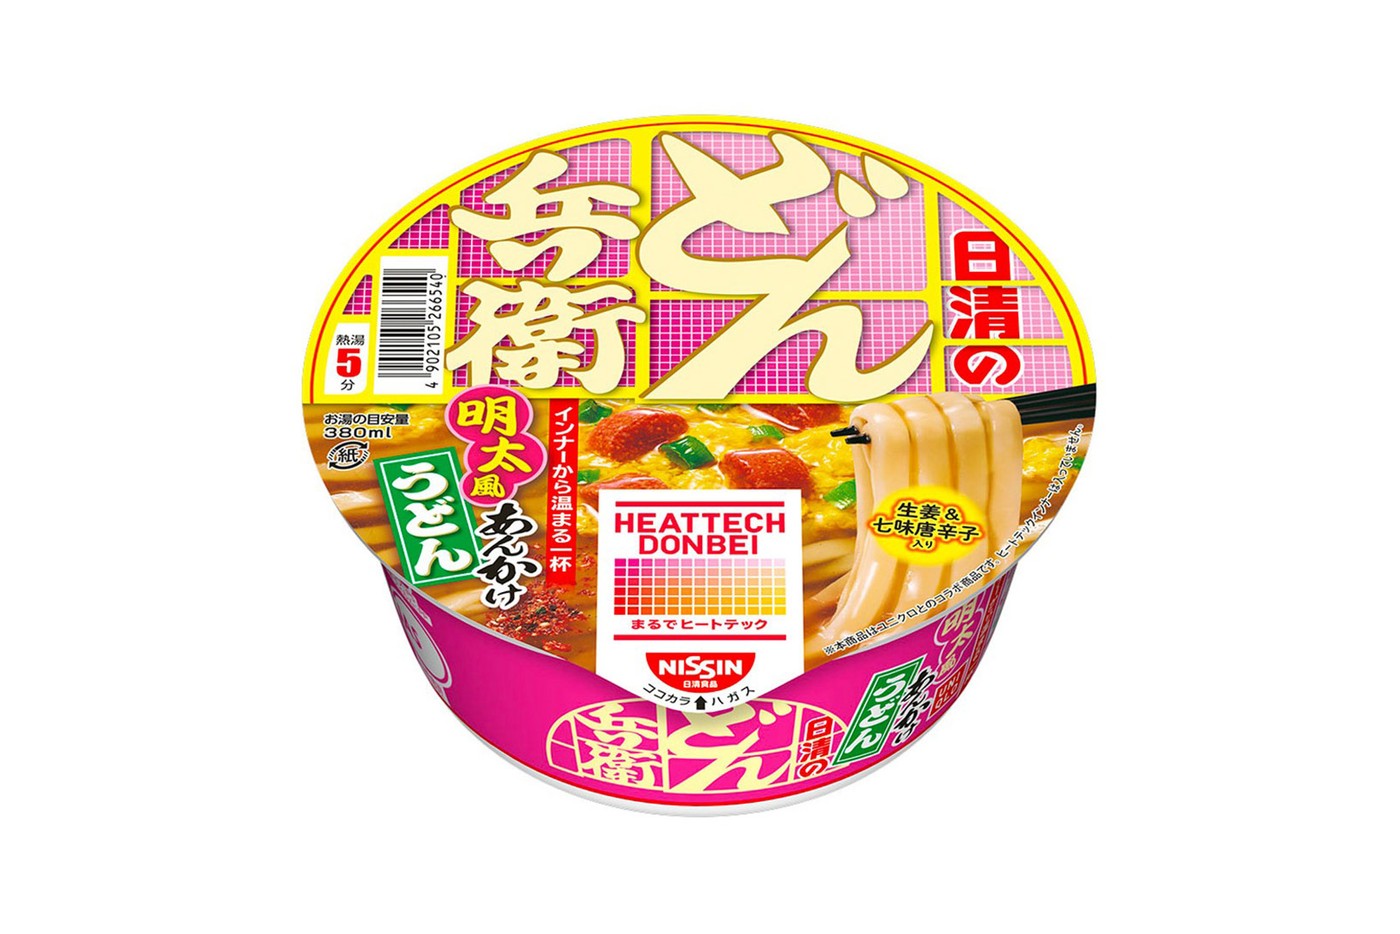 uniqlo nissin heattech donbei instant cup noodles snack collaboration release date japan